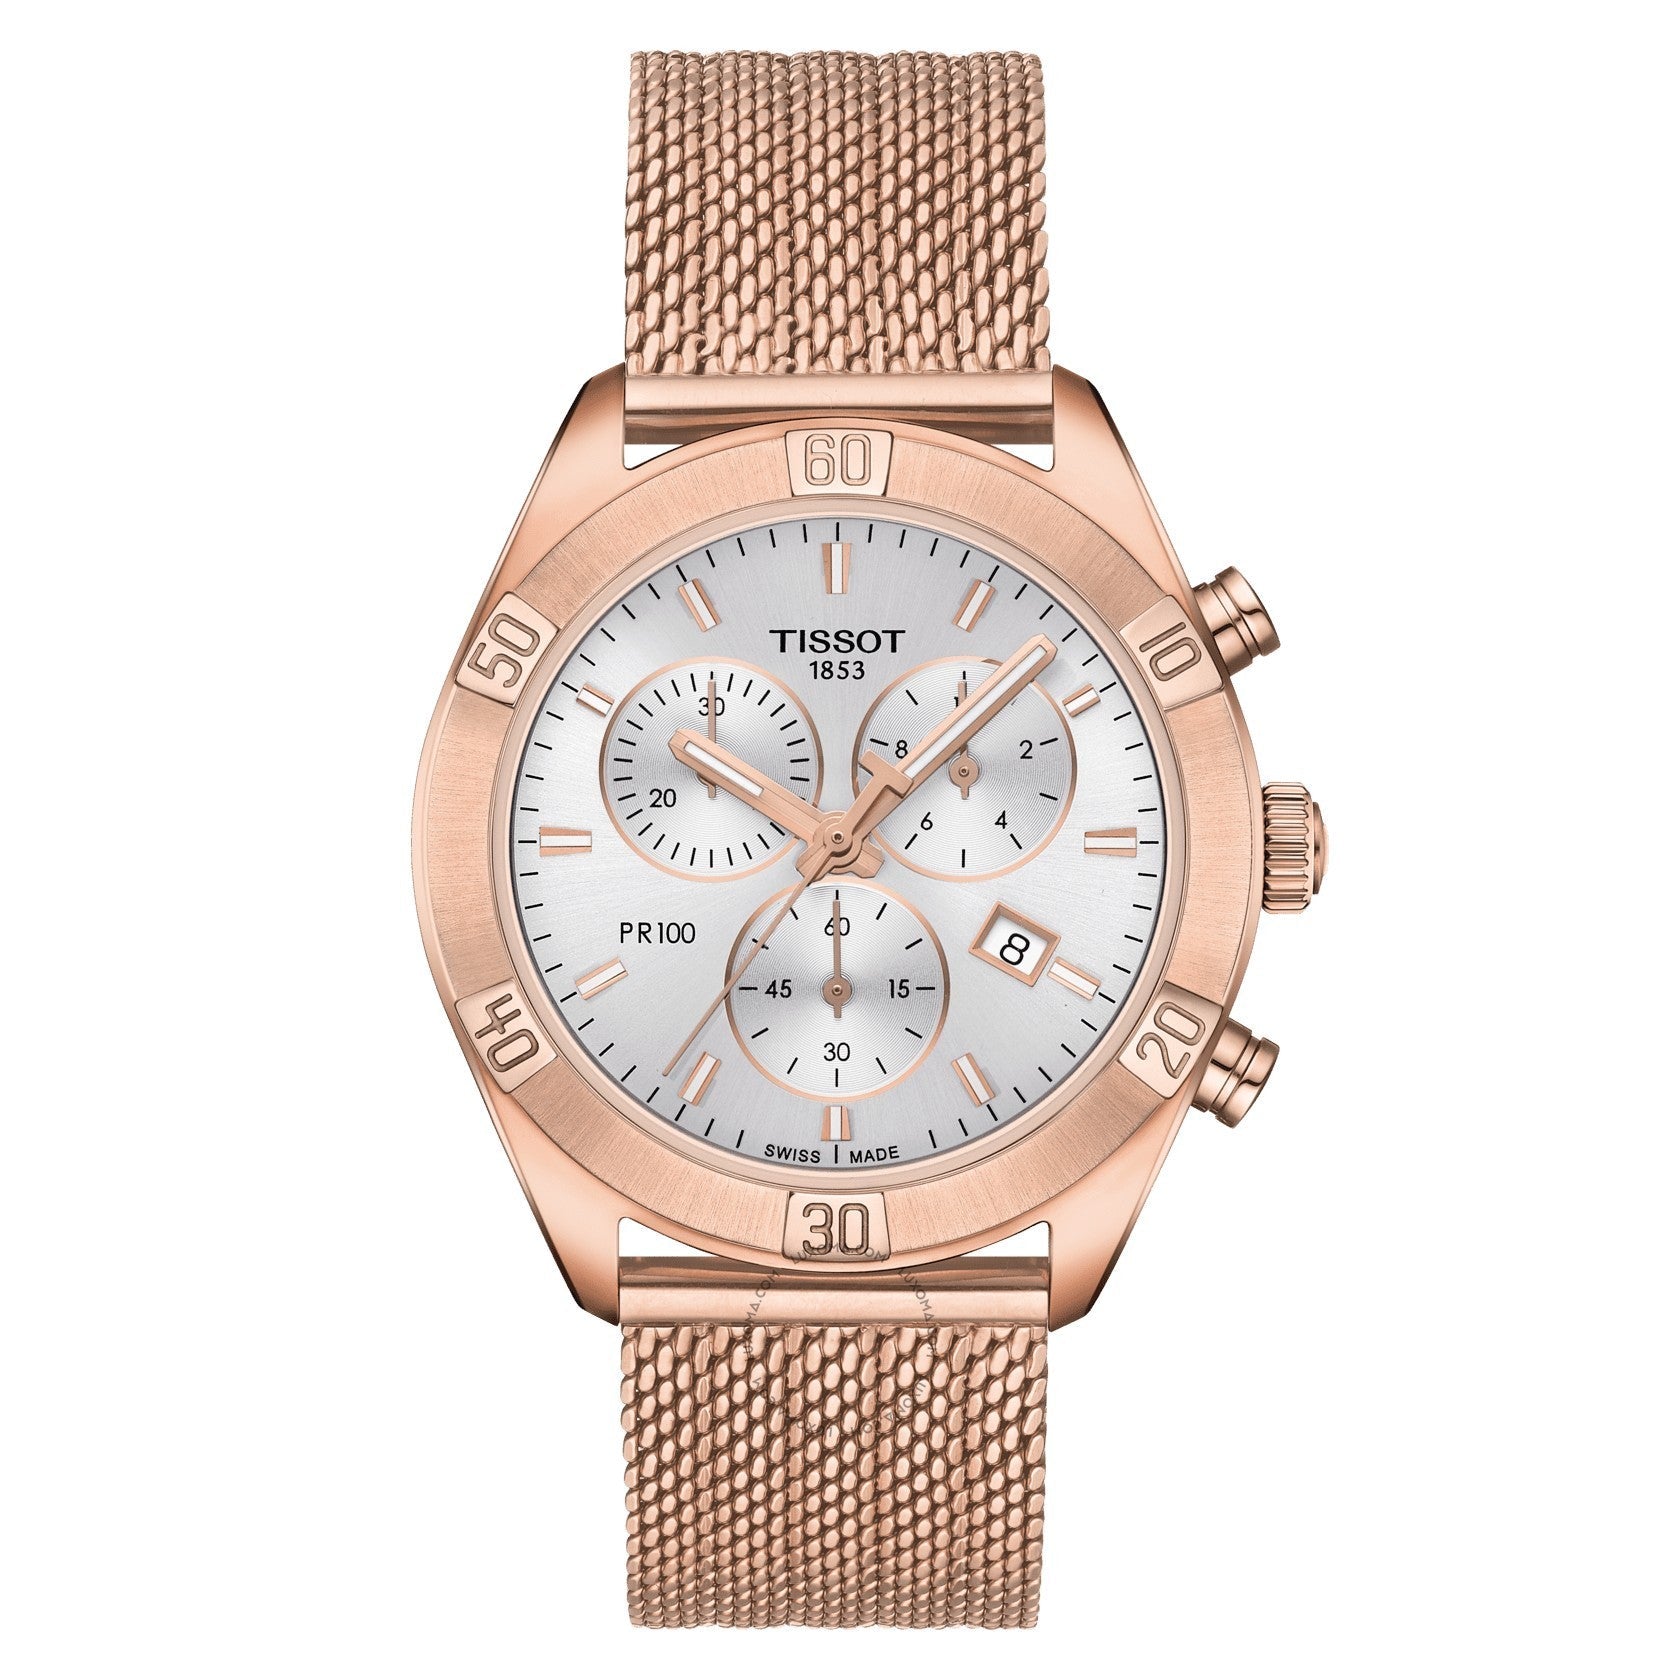 Tissot T-Classic Chronograph Silver Dial Ladies Watch T101.917.33.031.00